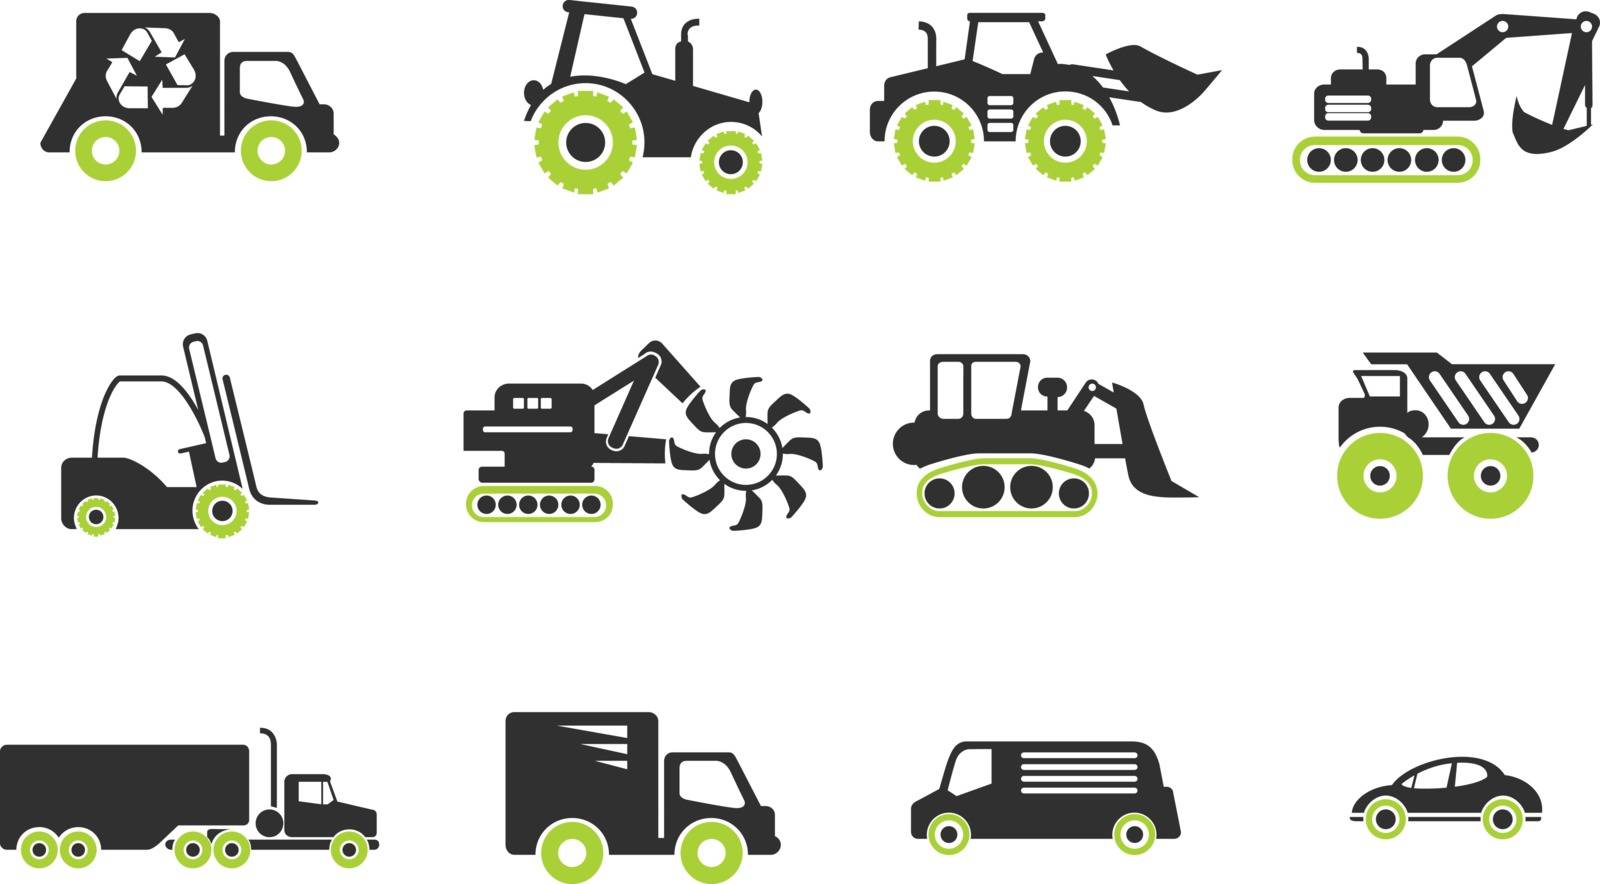 Transportation simply icons by ayax